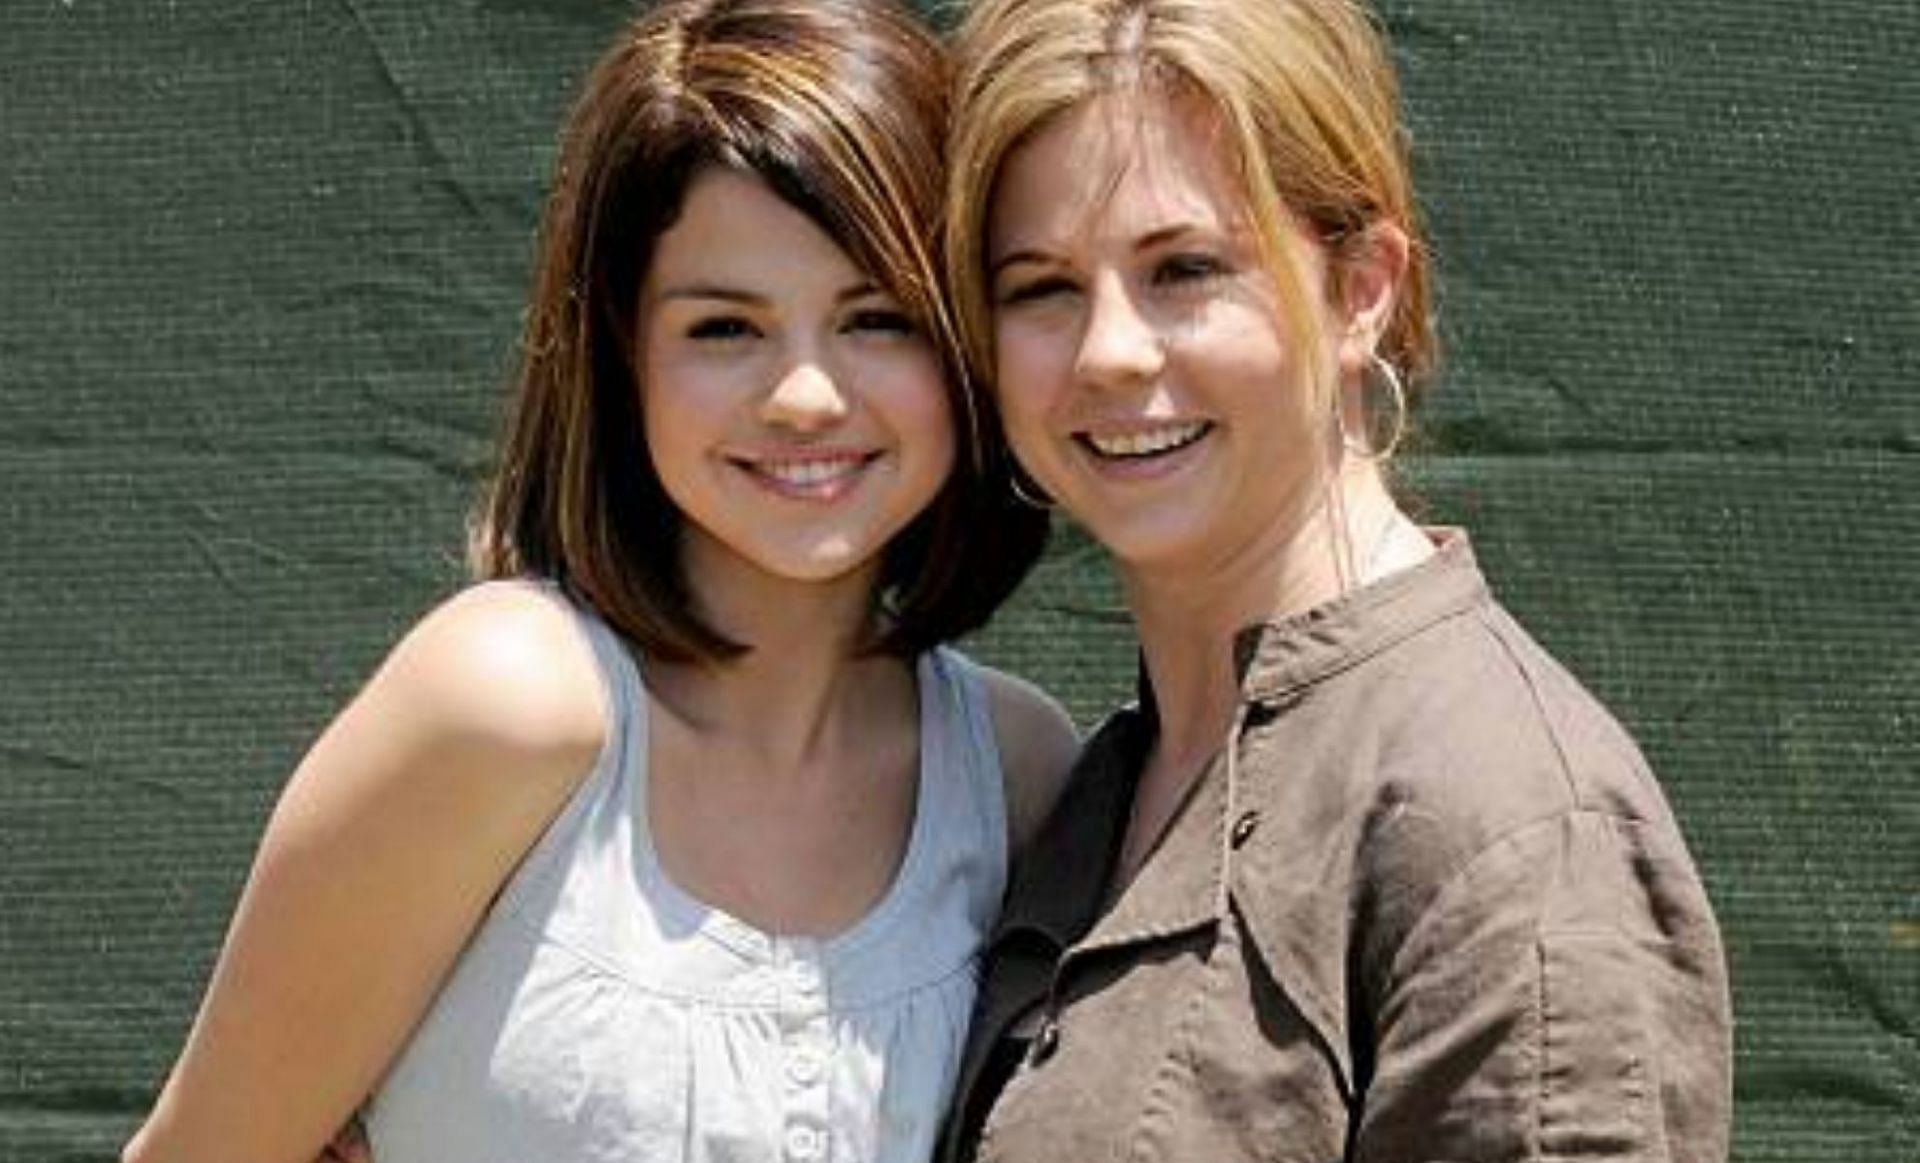 Selena Gomez with her mother, Mandy Teefey (Image via Gettyimages)